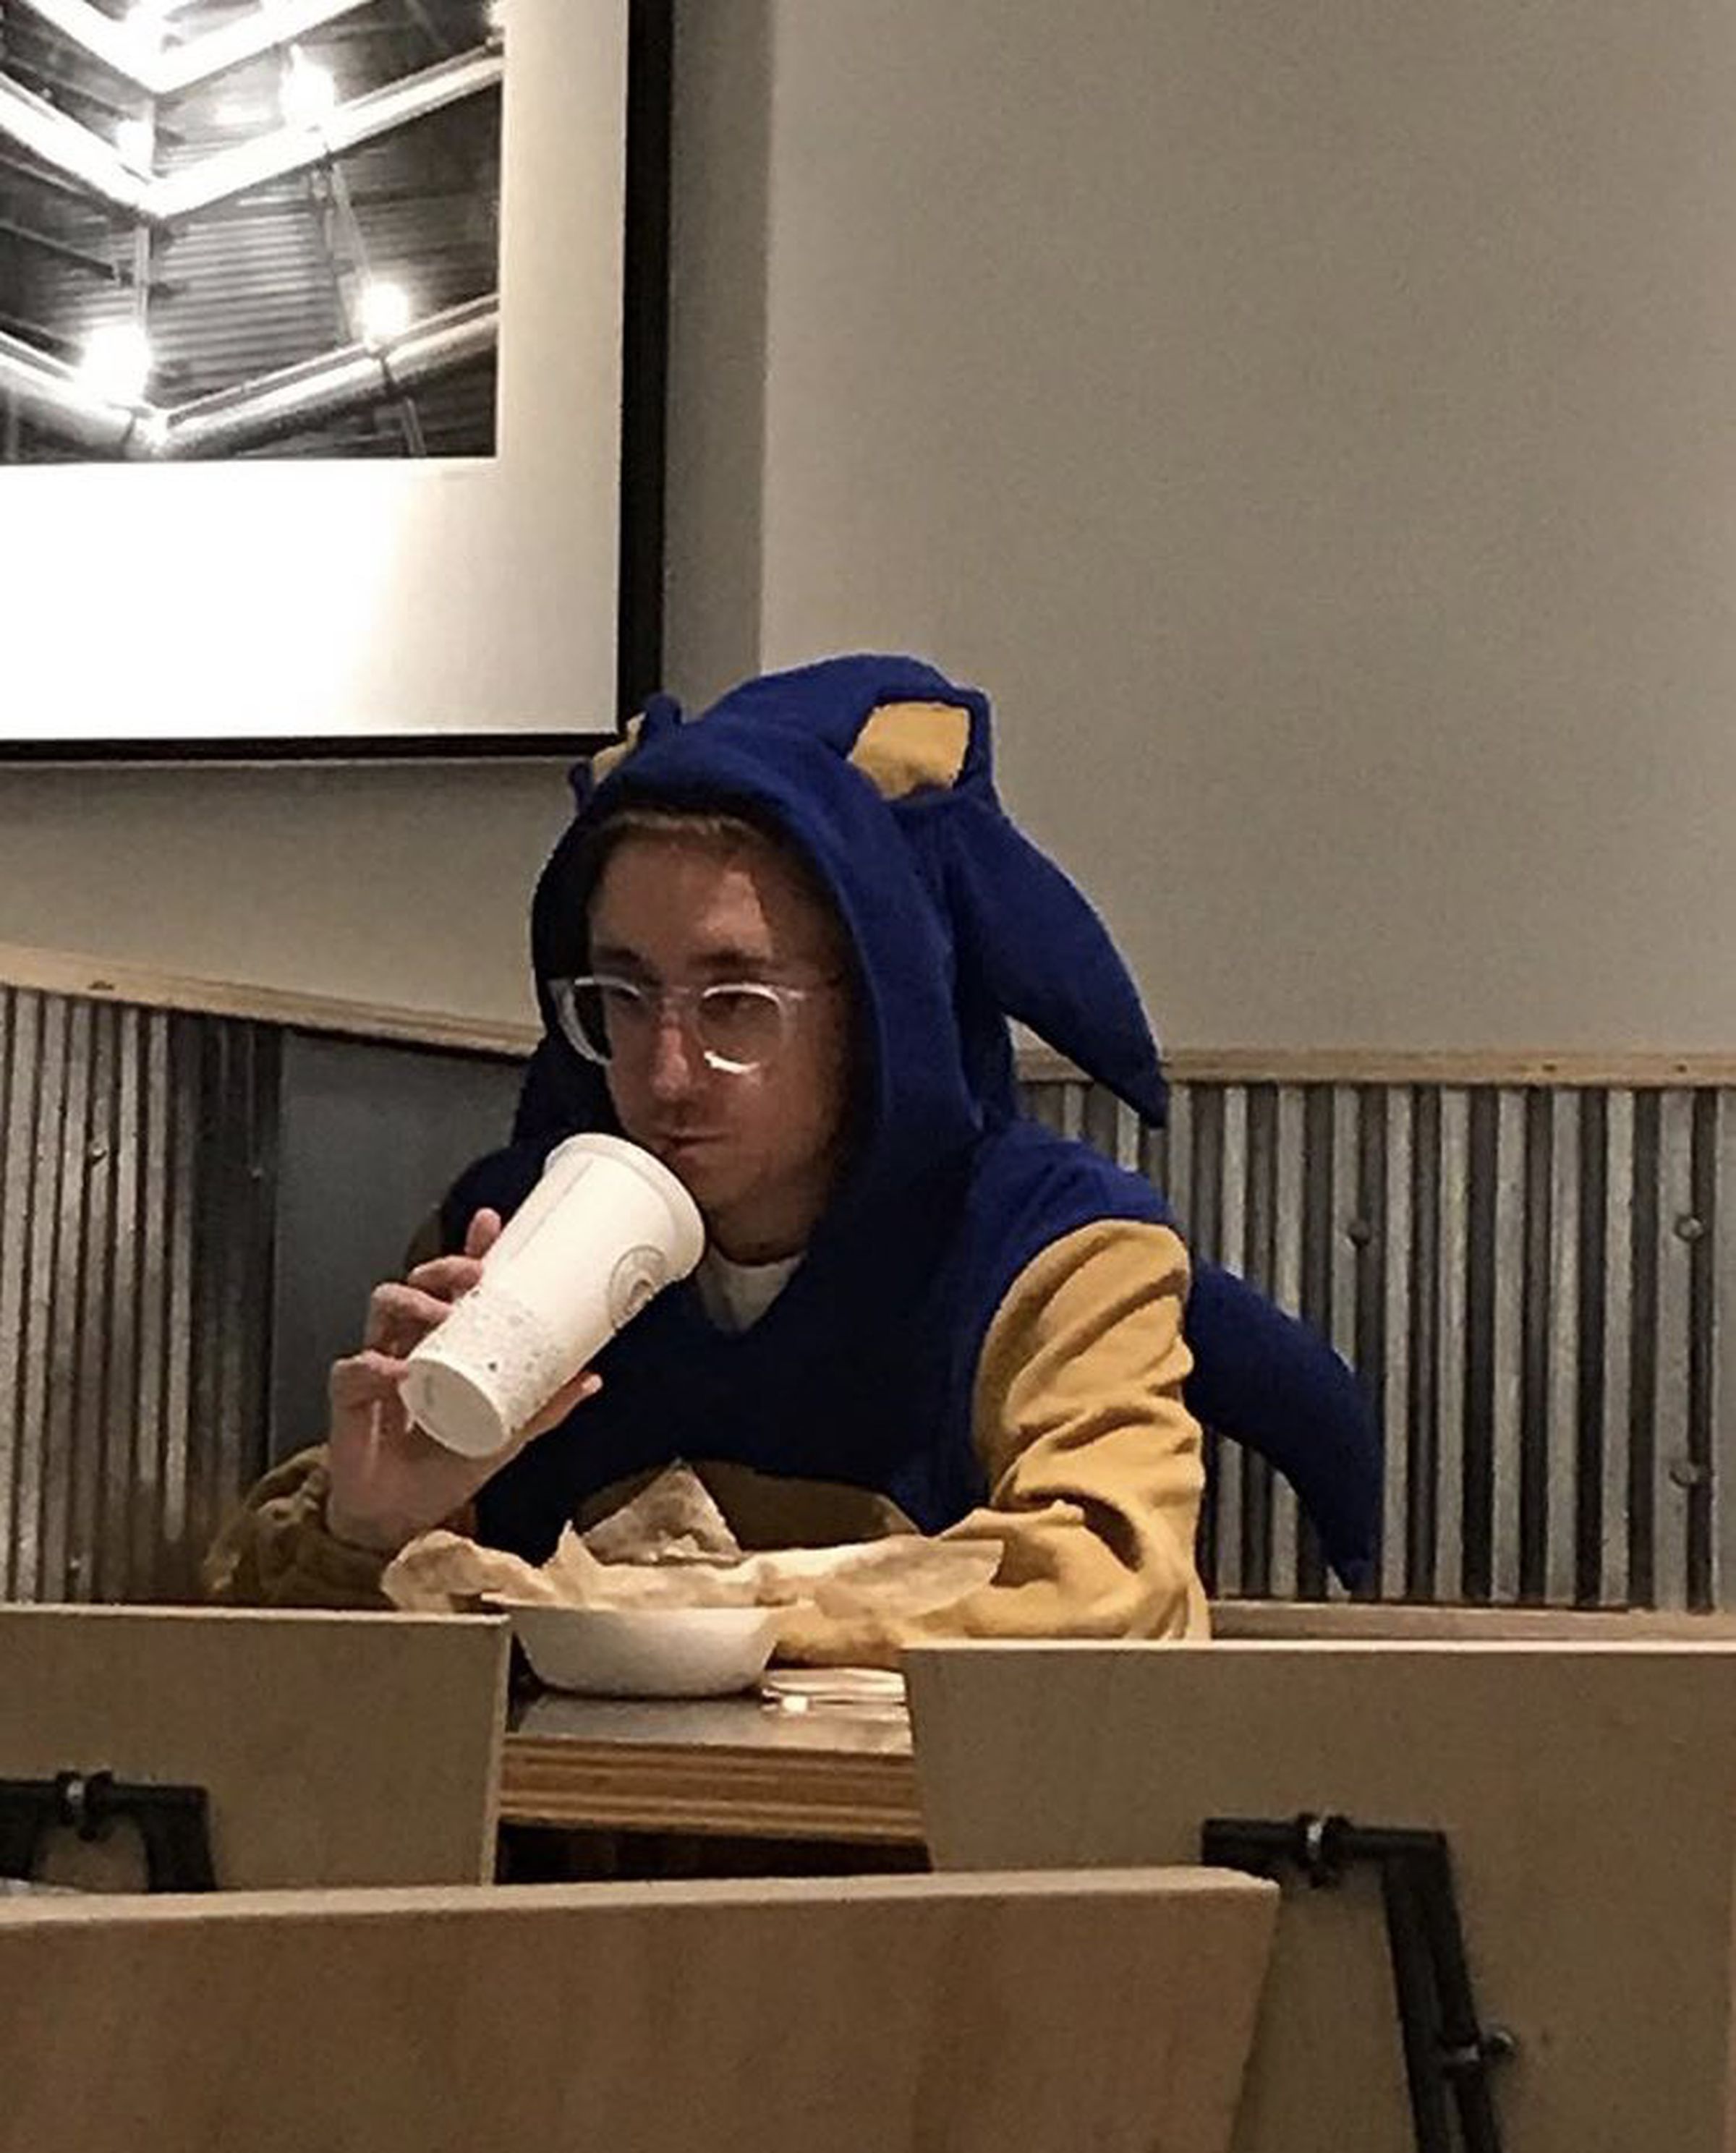 Cartoonist Alec Robbins, eating Chipotle while dressed as Sonic the Hedgehog.